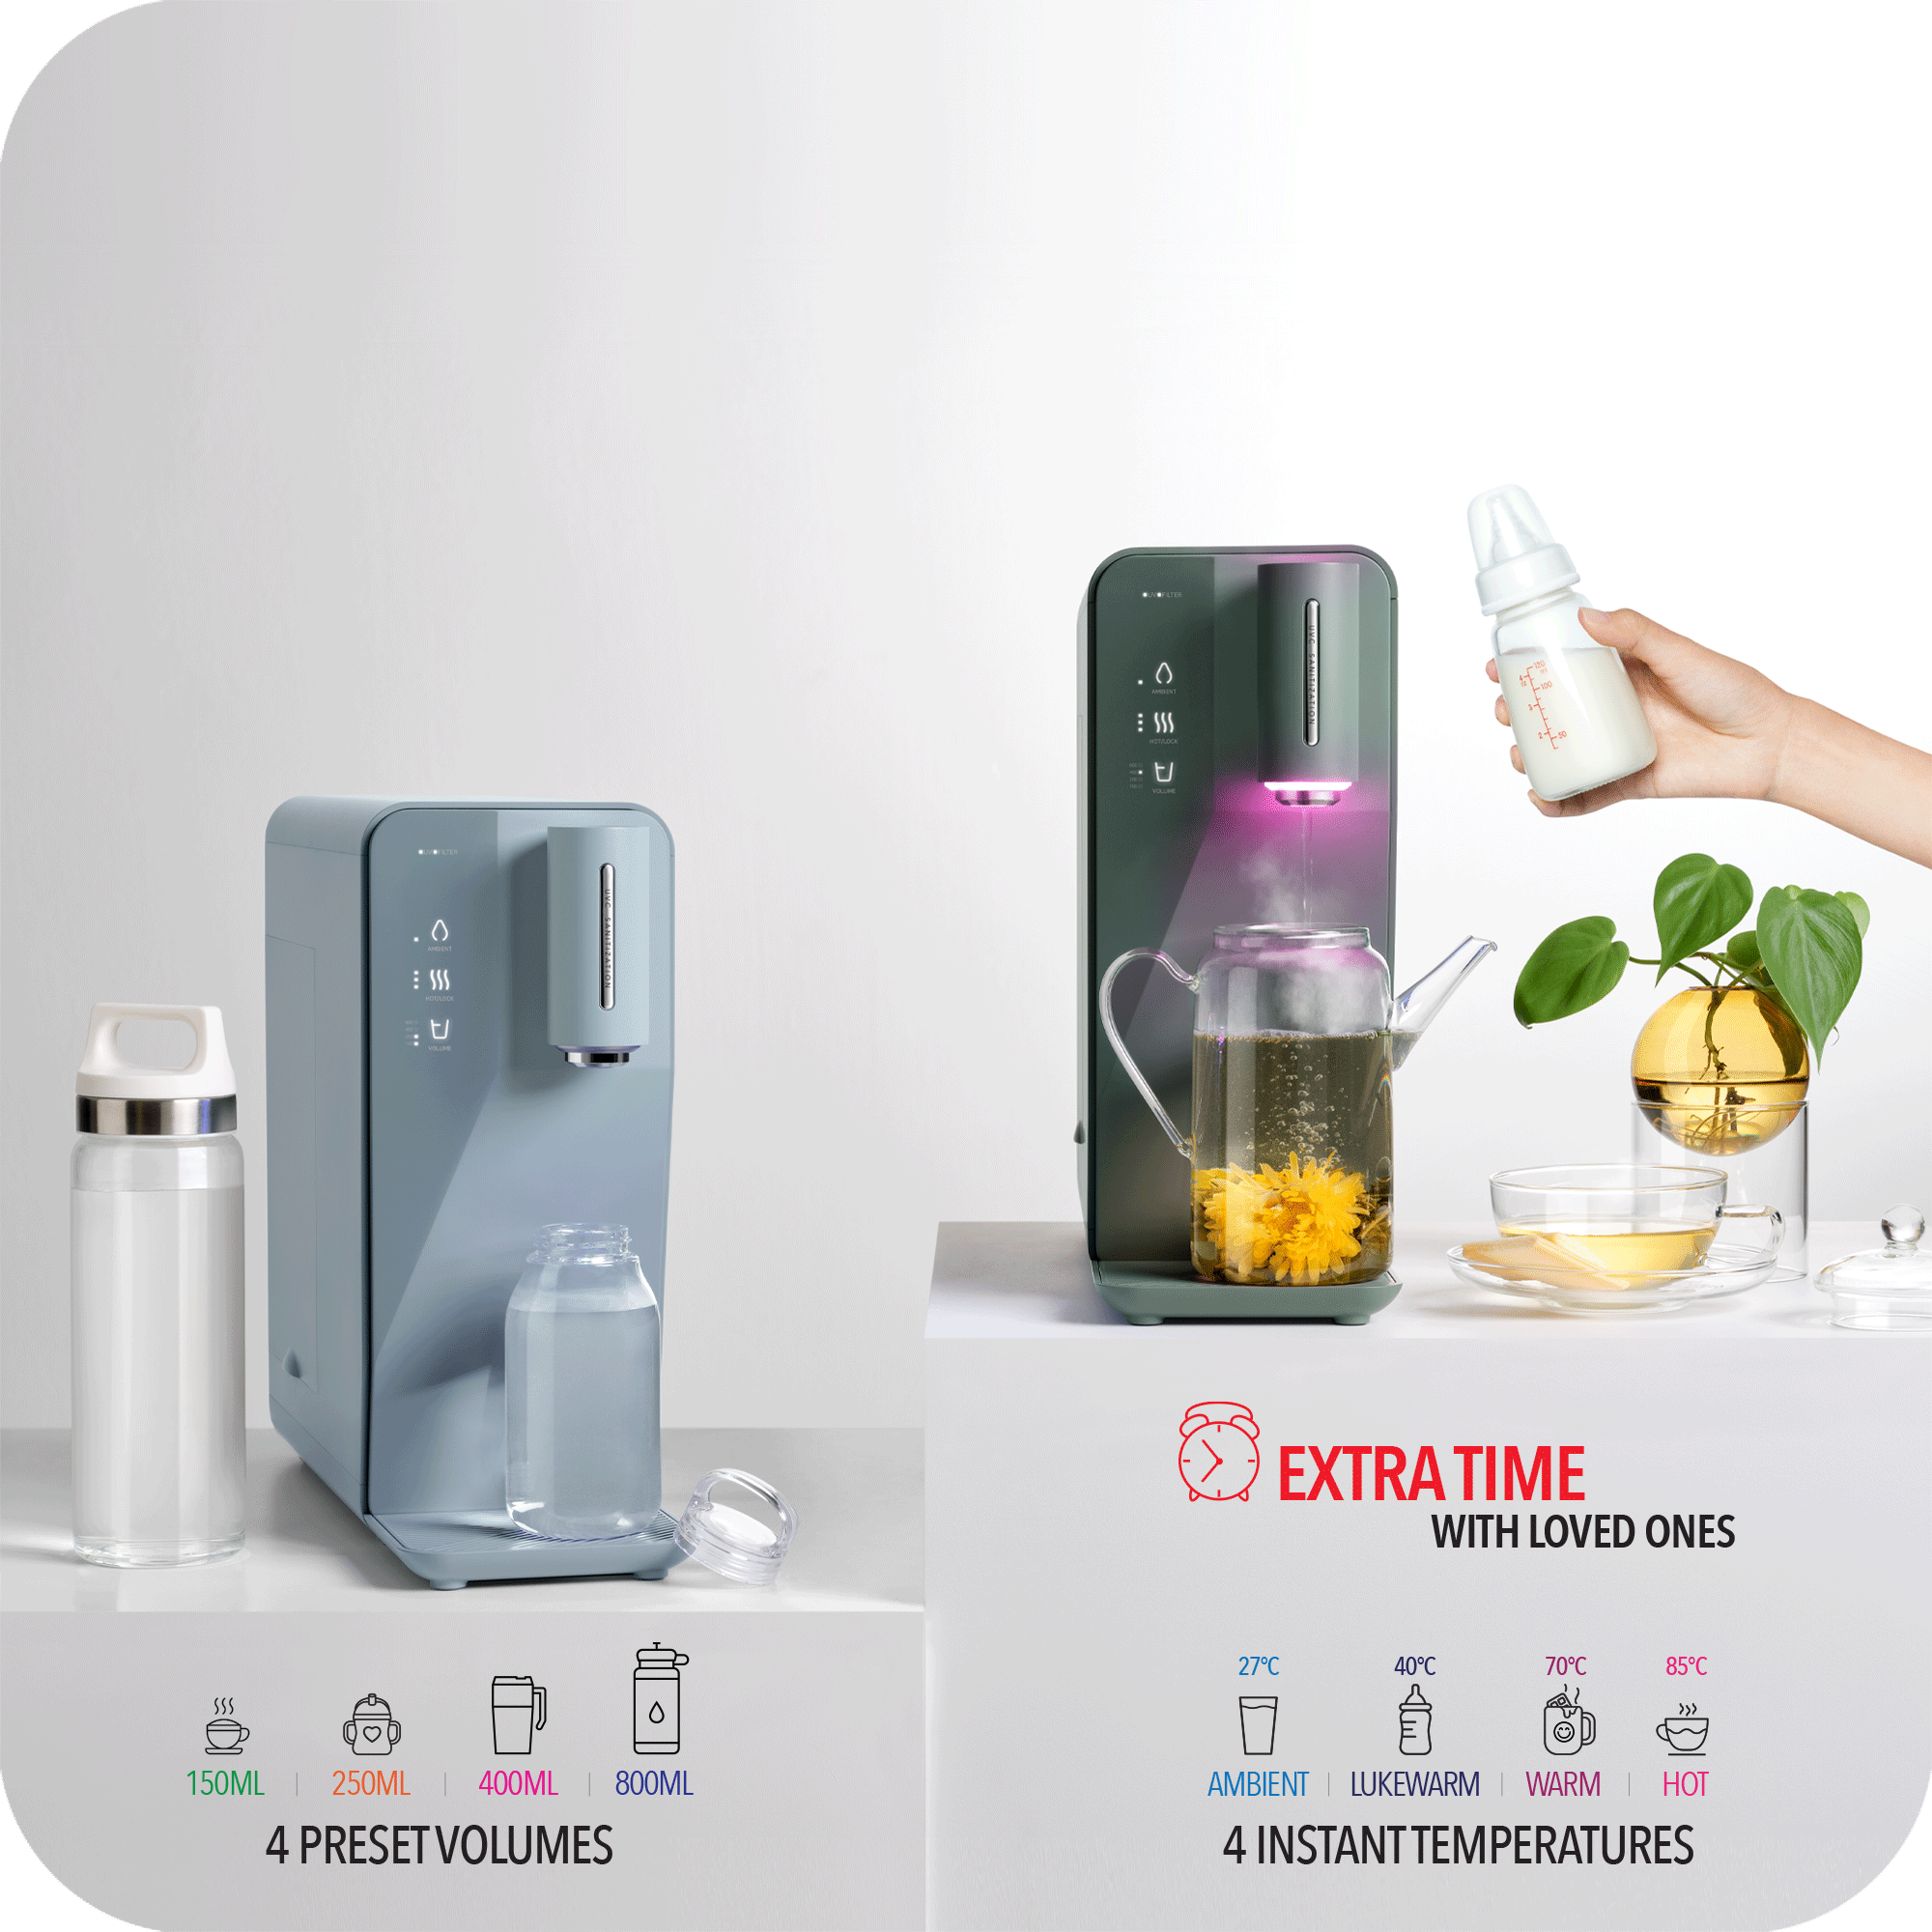 A woman is holding a bottle of Instant Hot Water Dispenser W10 - The Absolute by novita SG and a bottle of juice.